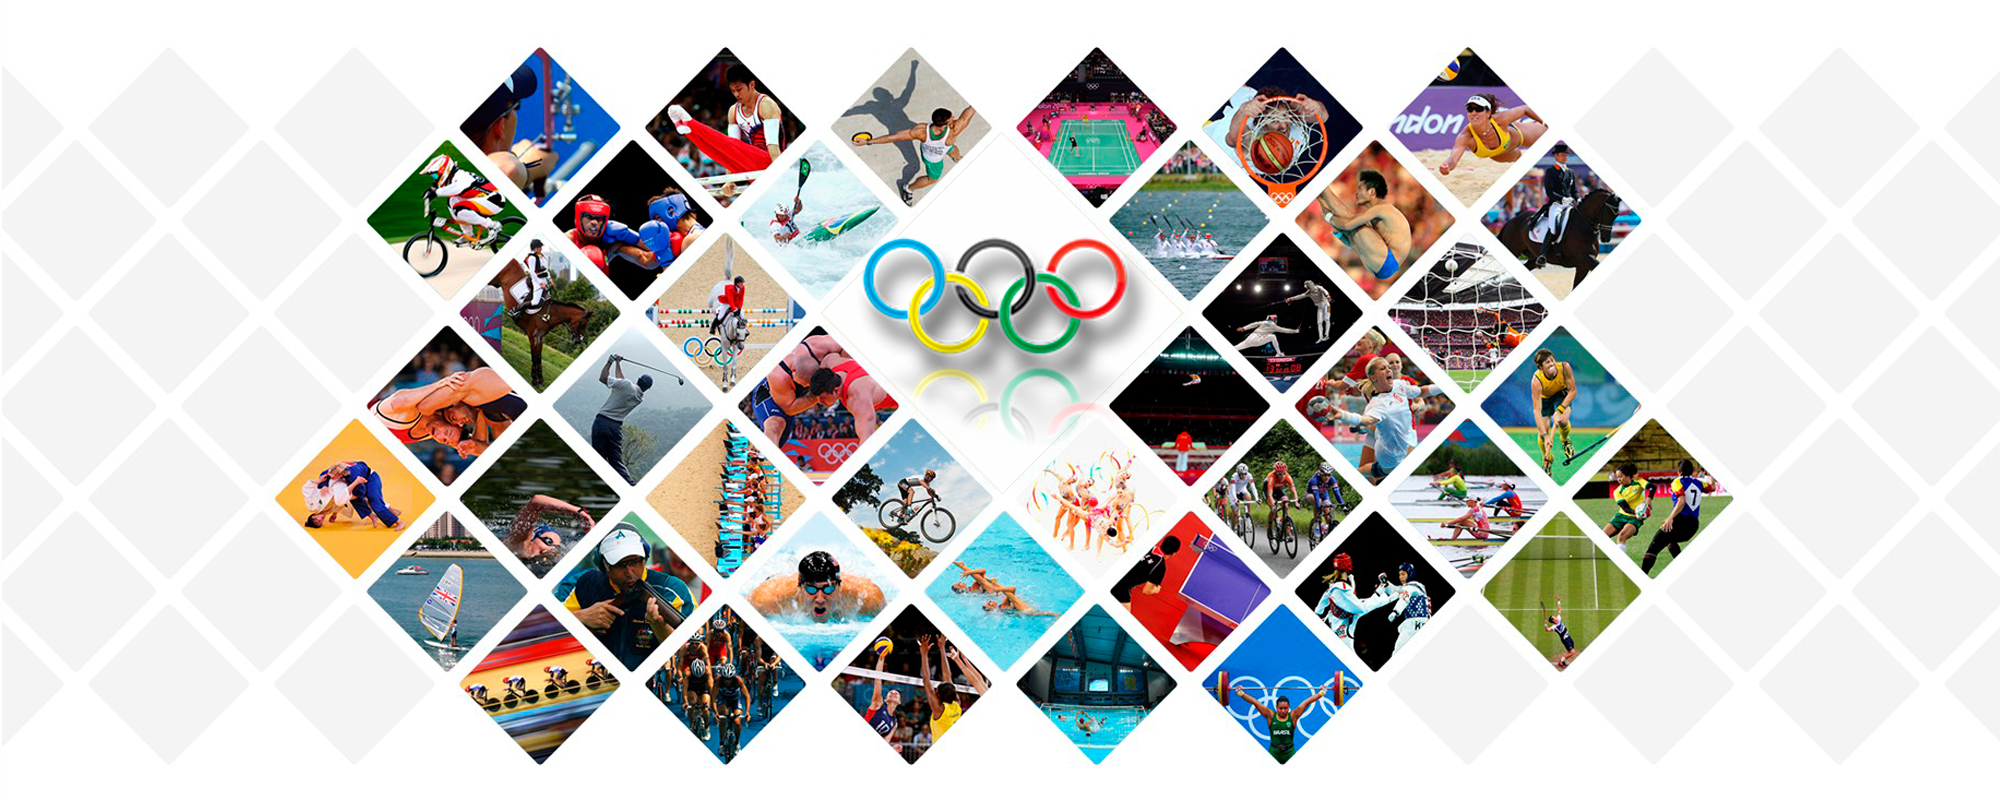 Olympic Games wallpaper, Sports, HQ Olympic Games pictureK Wallpaper 2019